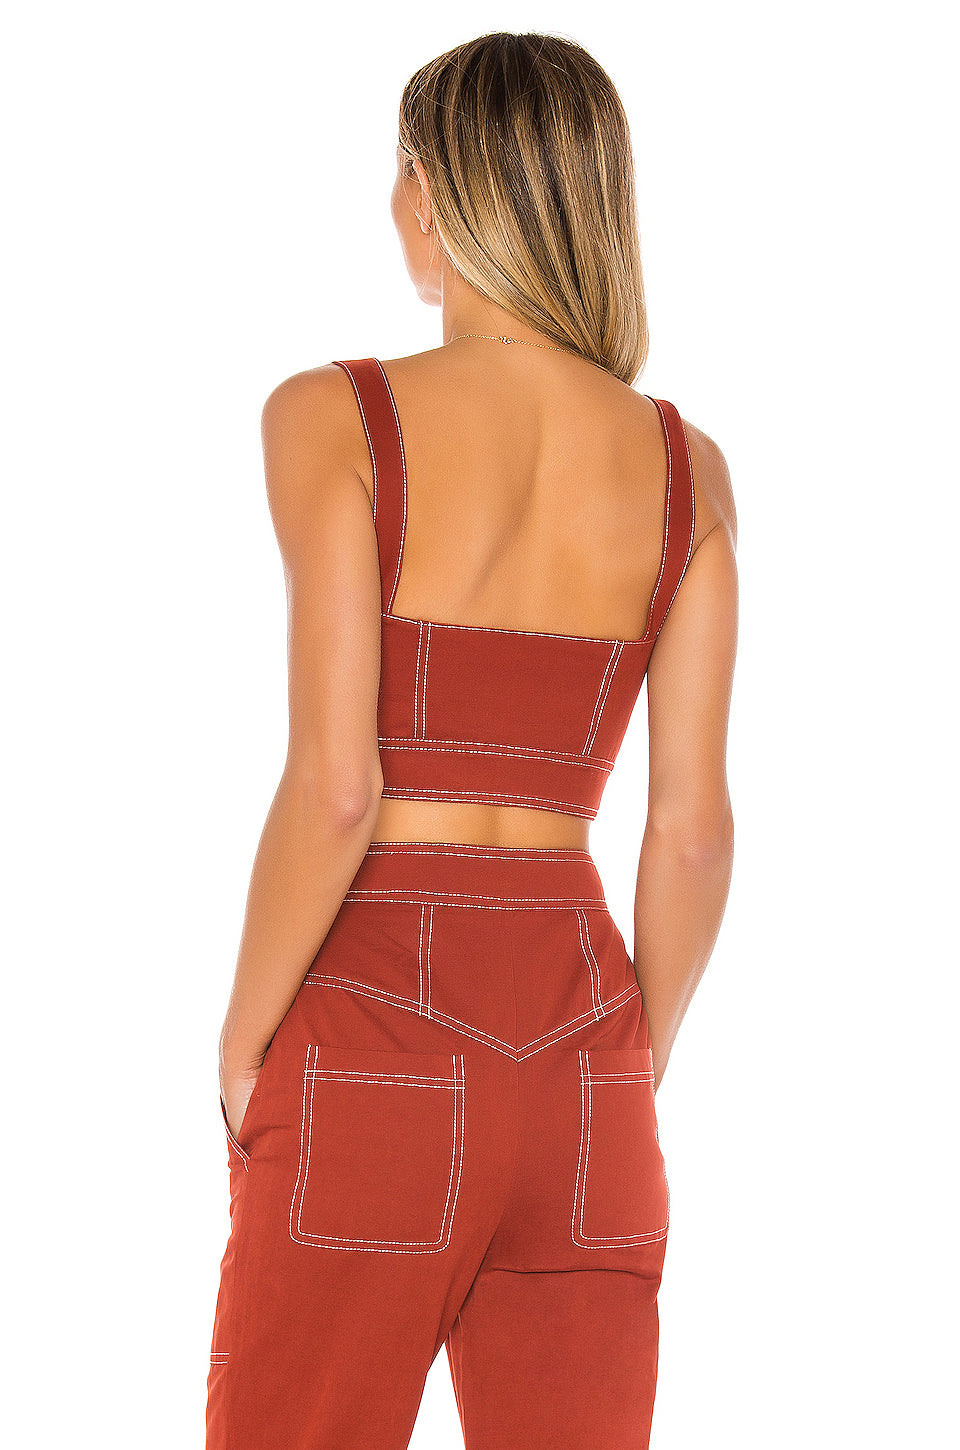 The Lovelle Top in BRICK RED